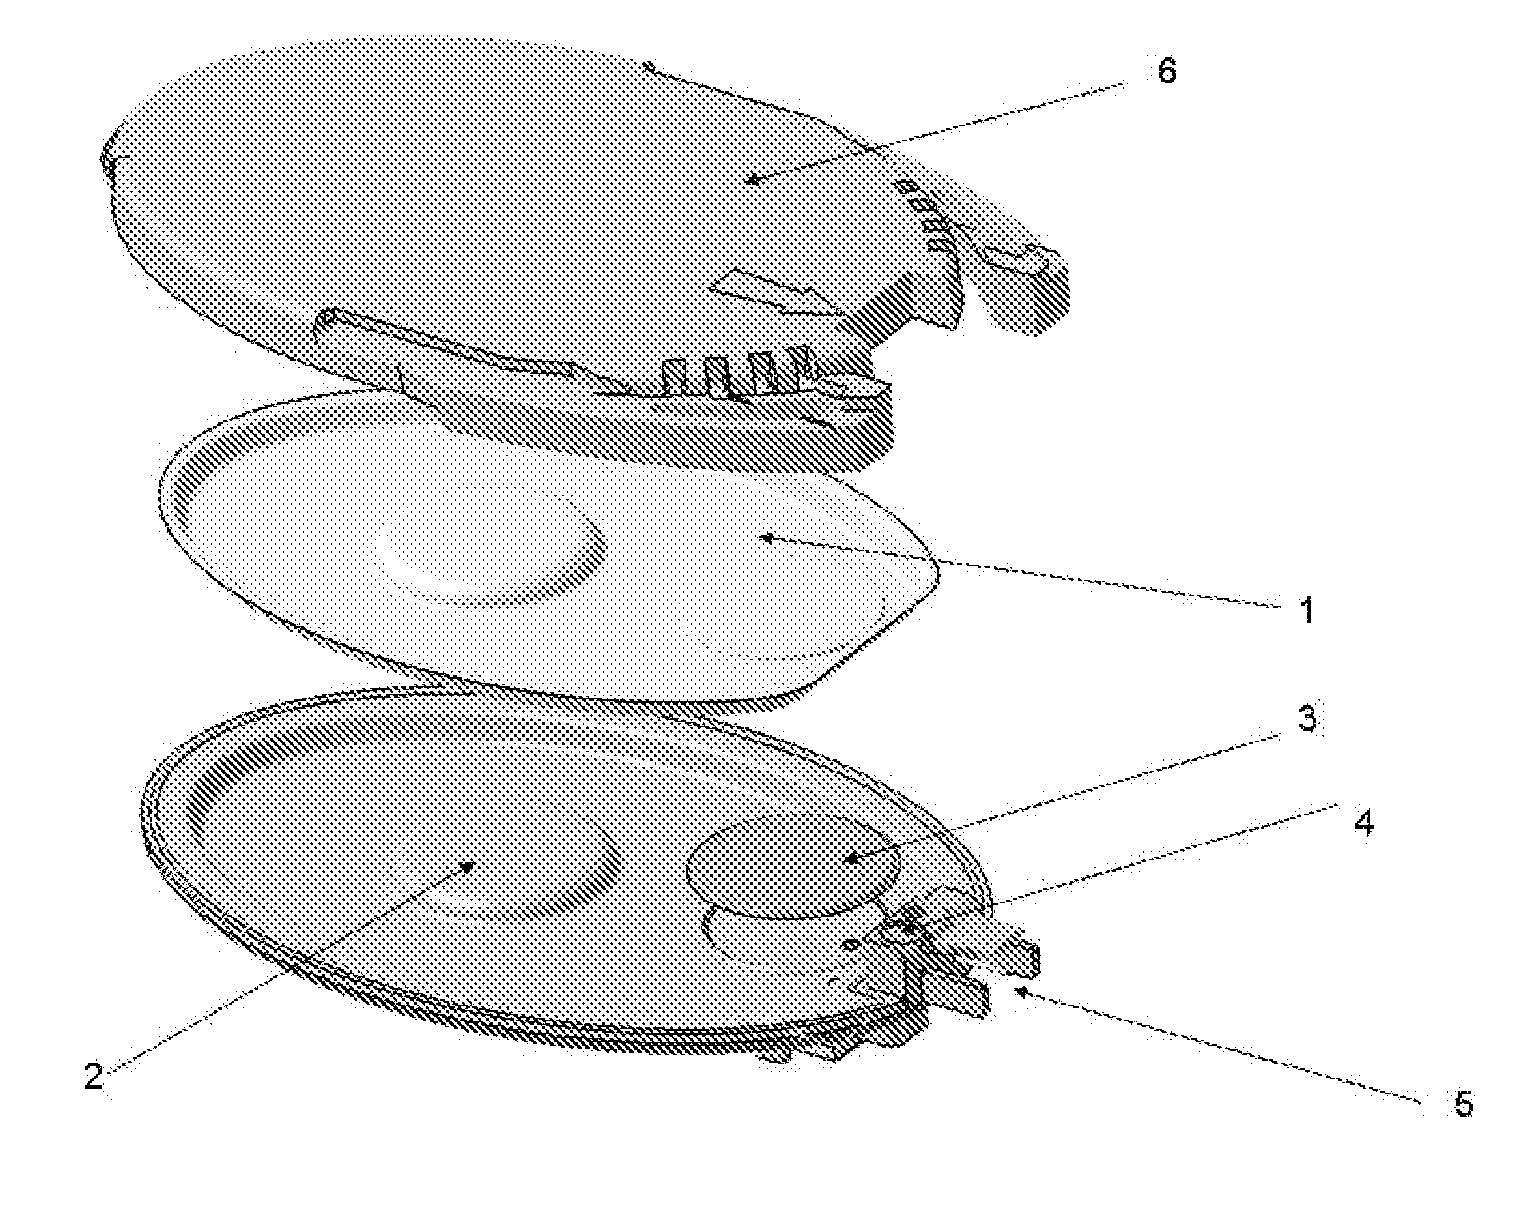 Container for storing a drug such as insulin